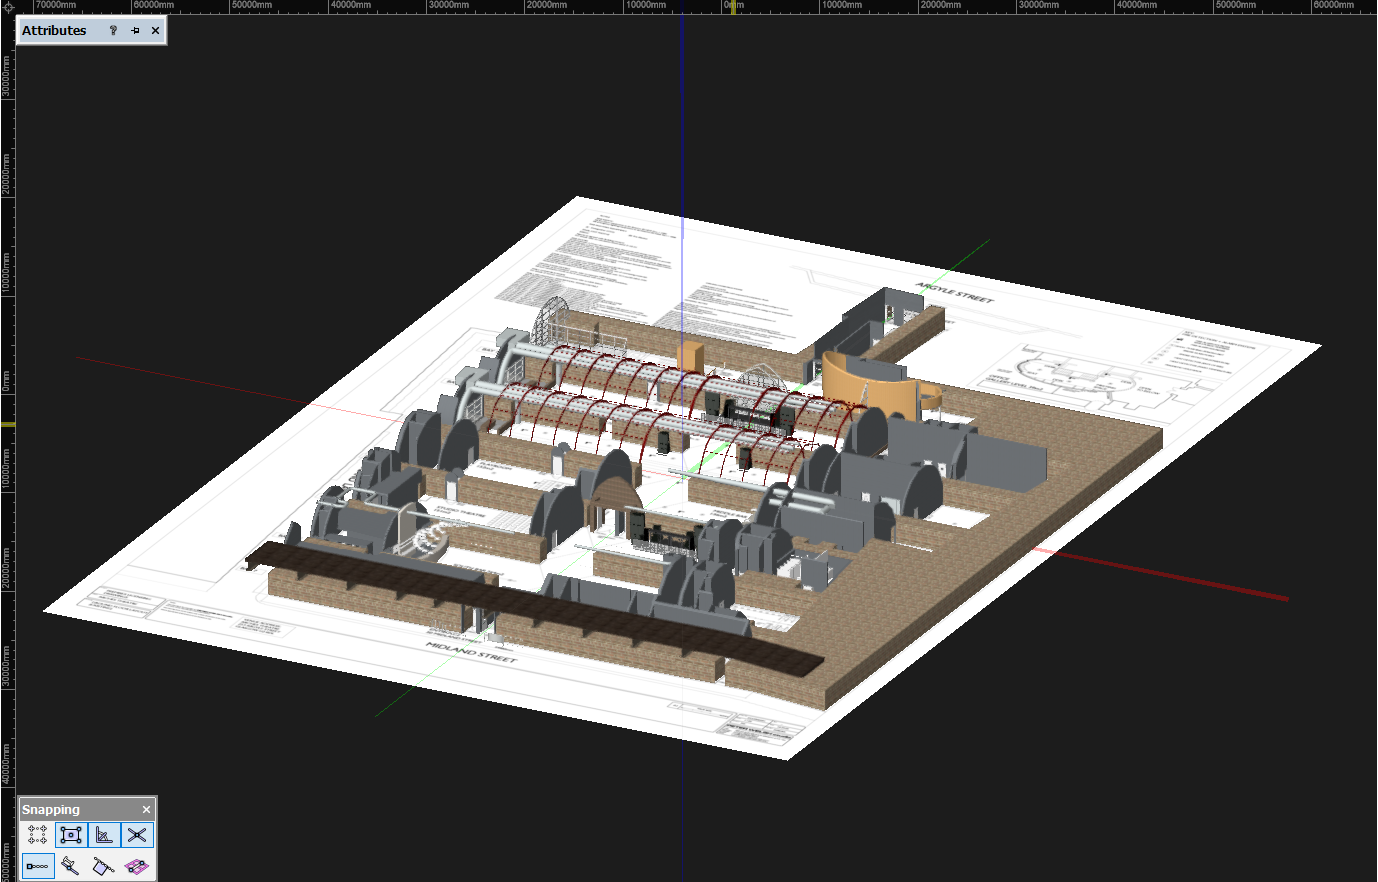 A side view of the virtual club model in Vectorworks, showing the club model on top of the floor plan.